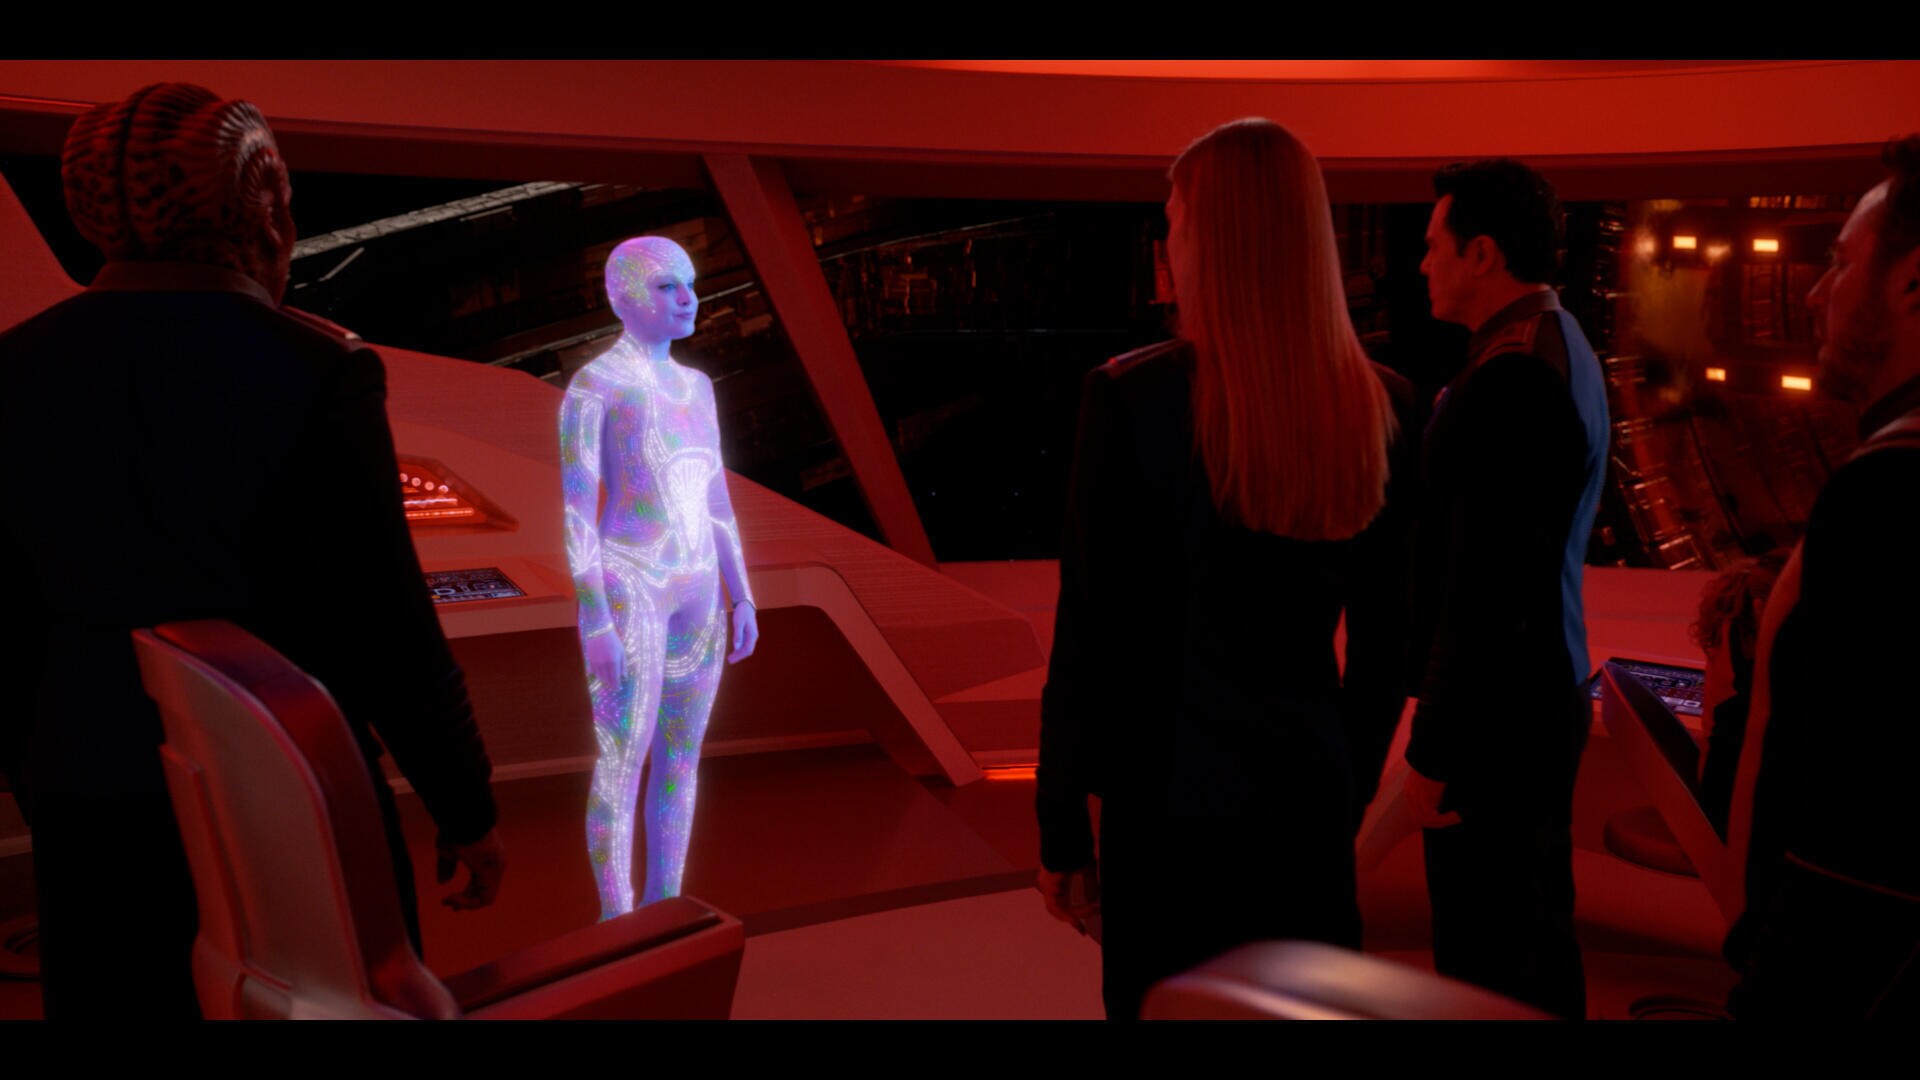 The Orville: New Horizons -- “Mortality Paradox” - Episode 303 -- The Orville crew discovers signs of modern civilization on a planet known to be uninhabited. Lt. Cmdr. Bortus (Peter Macon), Dina (Elizabeth Gillies), Cmdr. Kelly Grayson (Adrianne Palicki), Capt. Ed Mercer (Seth MacFarlane), and Lt. Gordon Malloy (Scott Grimes), shown. (Photo by: Hulu)